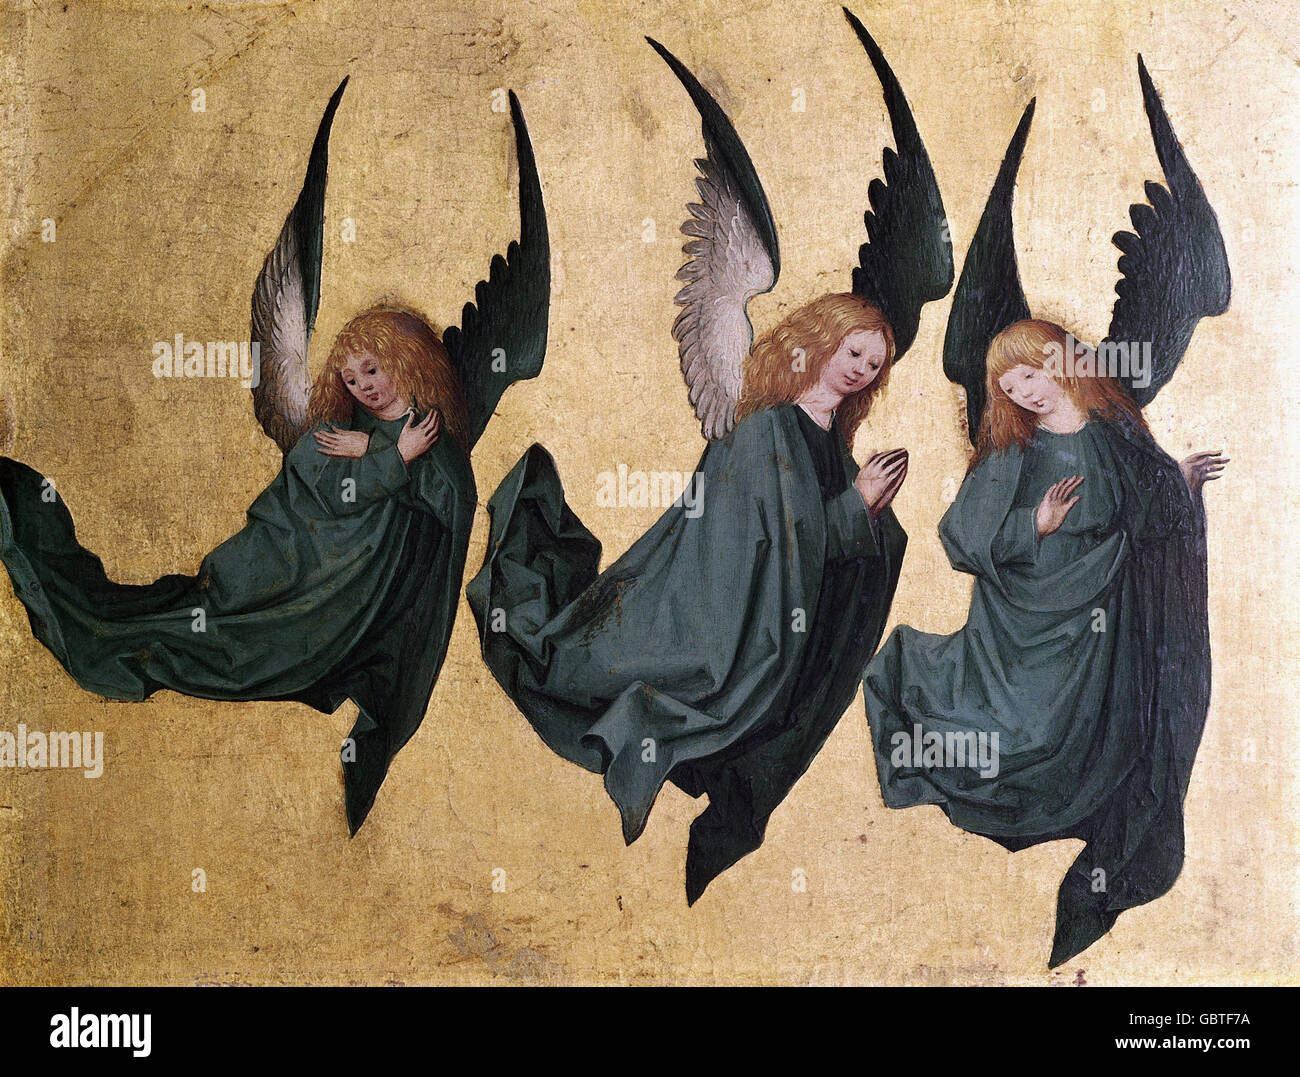 fine arts, religious art, angel, 'Three Angels' painting, master of the housebook, late 15th century, Museum of Contemporary Art (Basel), Stock Photo